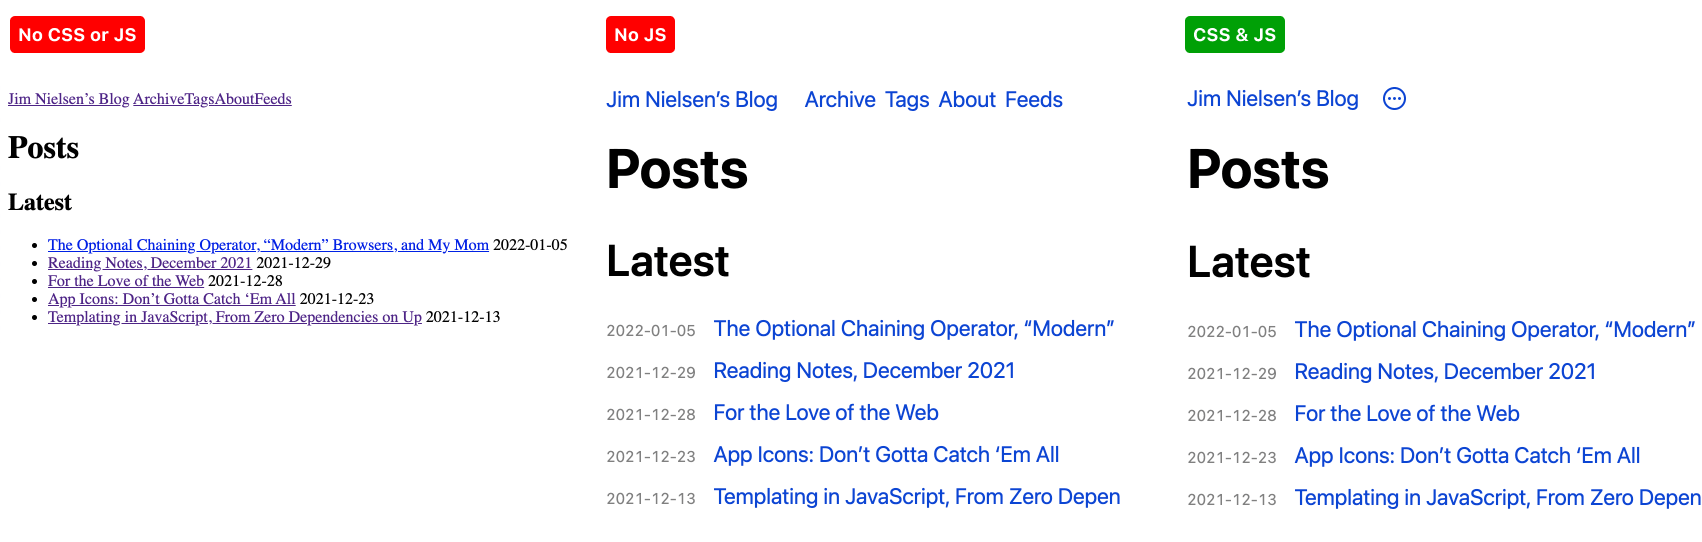 Screenshot of blog.jim-nielsen.com without CSS or JS, then with no JS, then finally with CSS & JS.